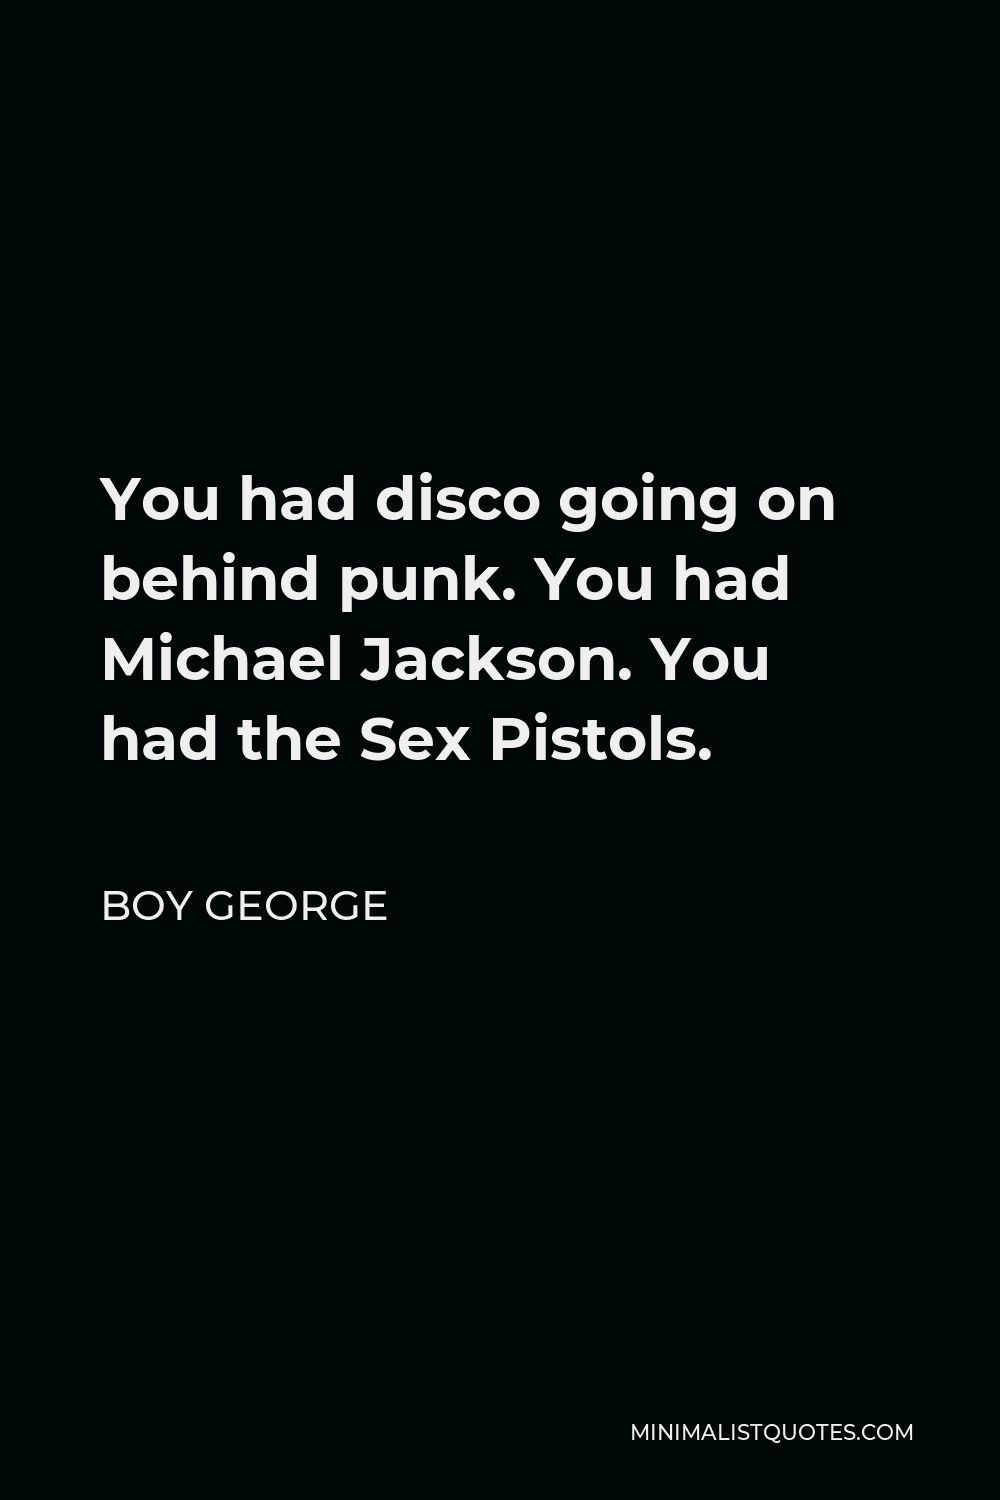 Boy George Quote - You had disco going on behind punk. You had Michael Jackson. You had the Sex Pistols.